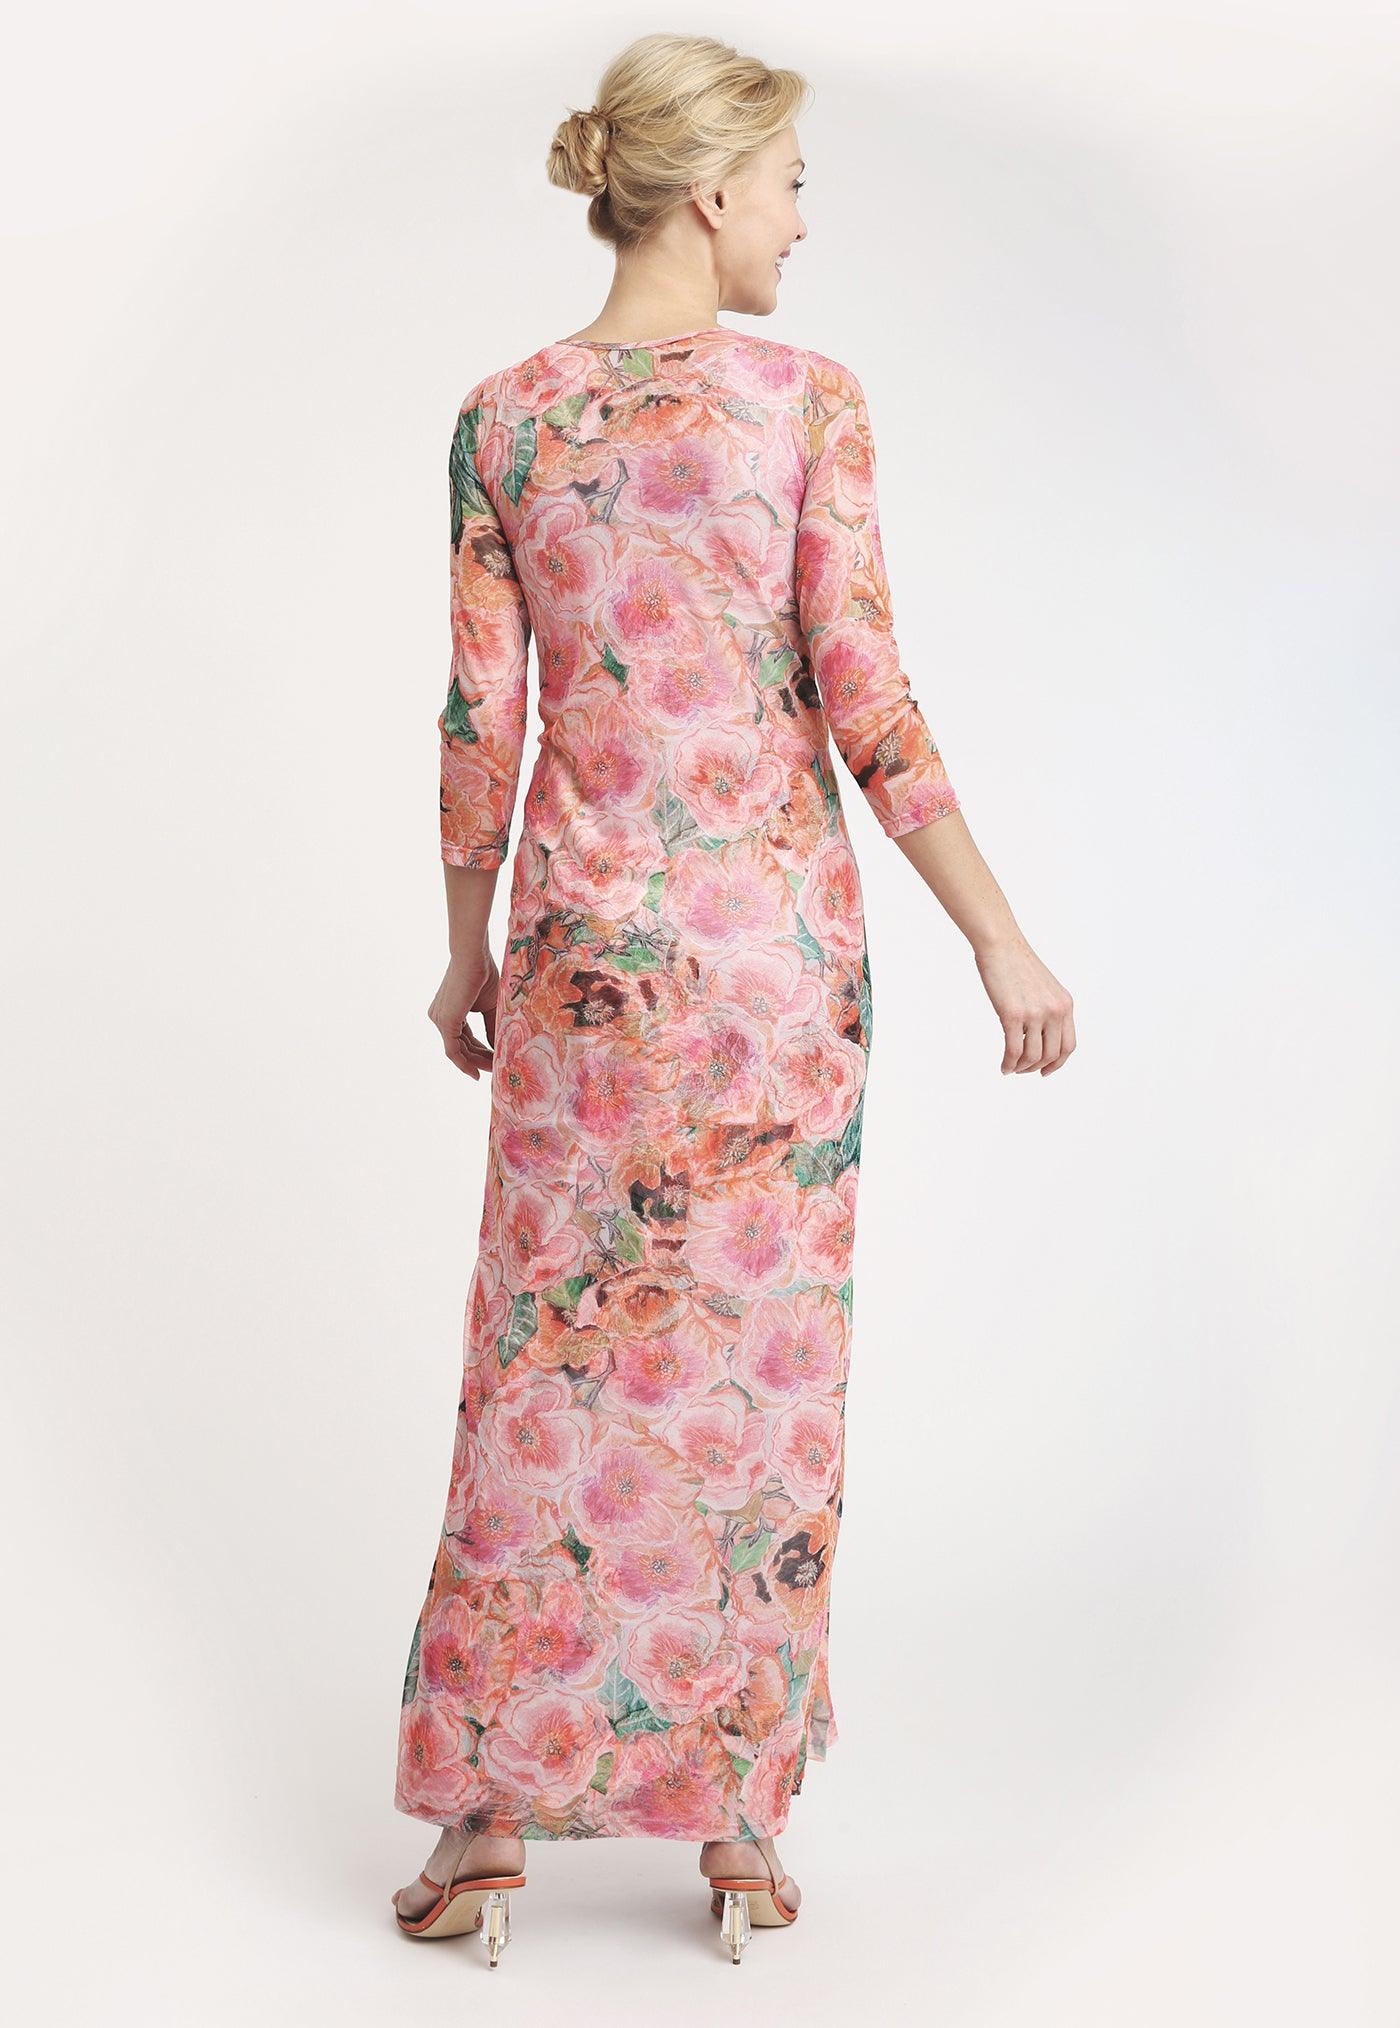 pink and orange floral printed mesh wrap dress layered over long pink and orange long stretch knit dress